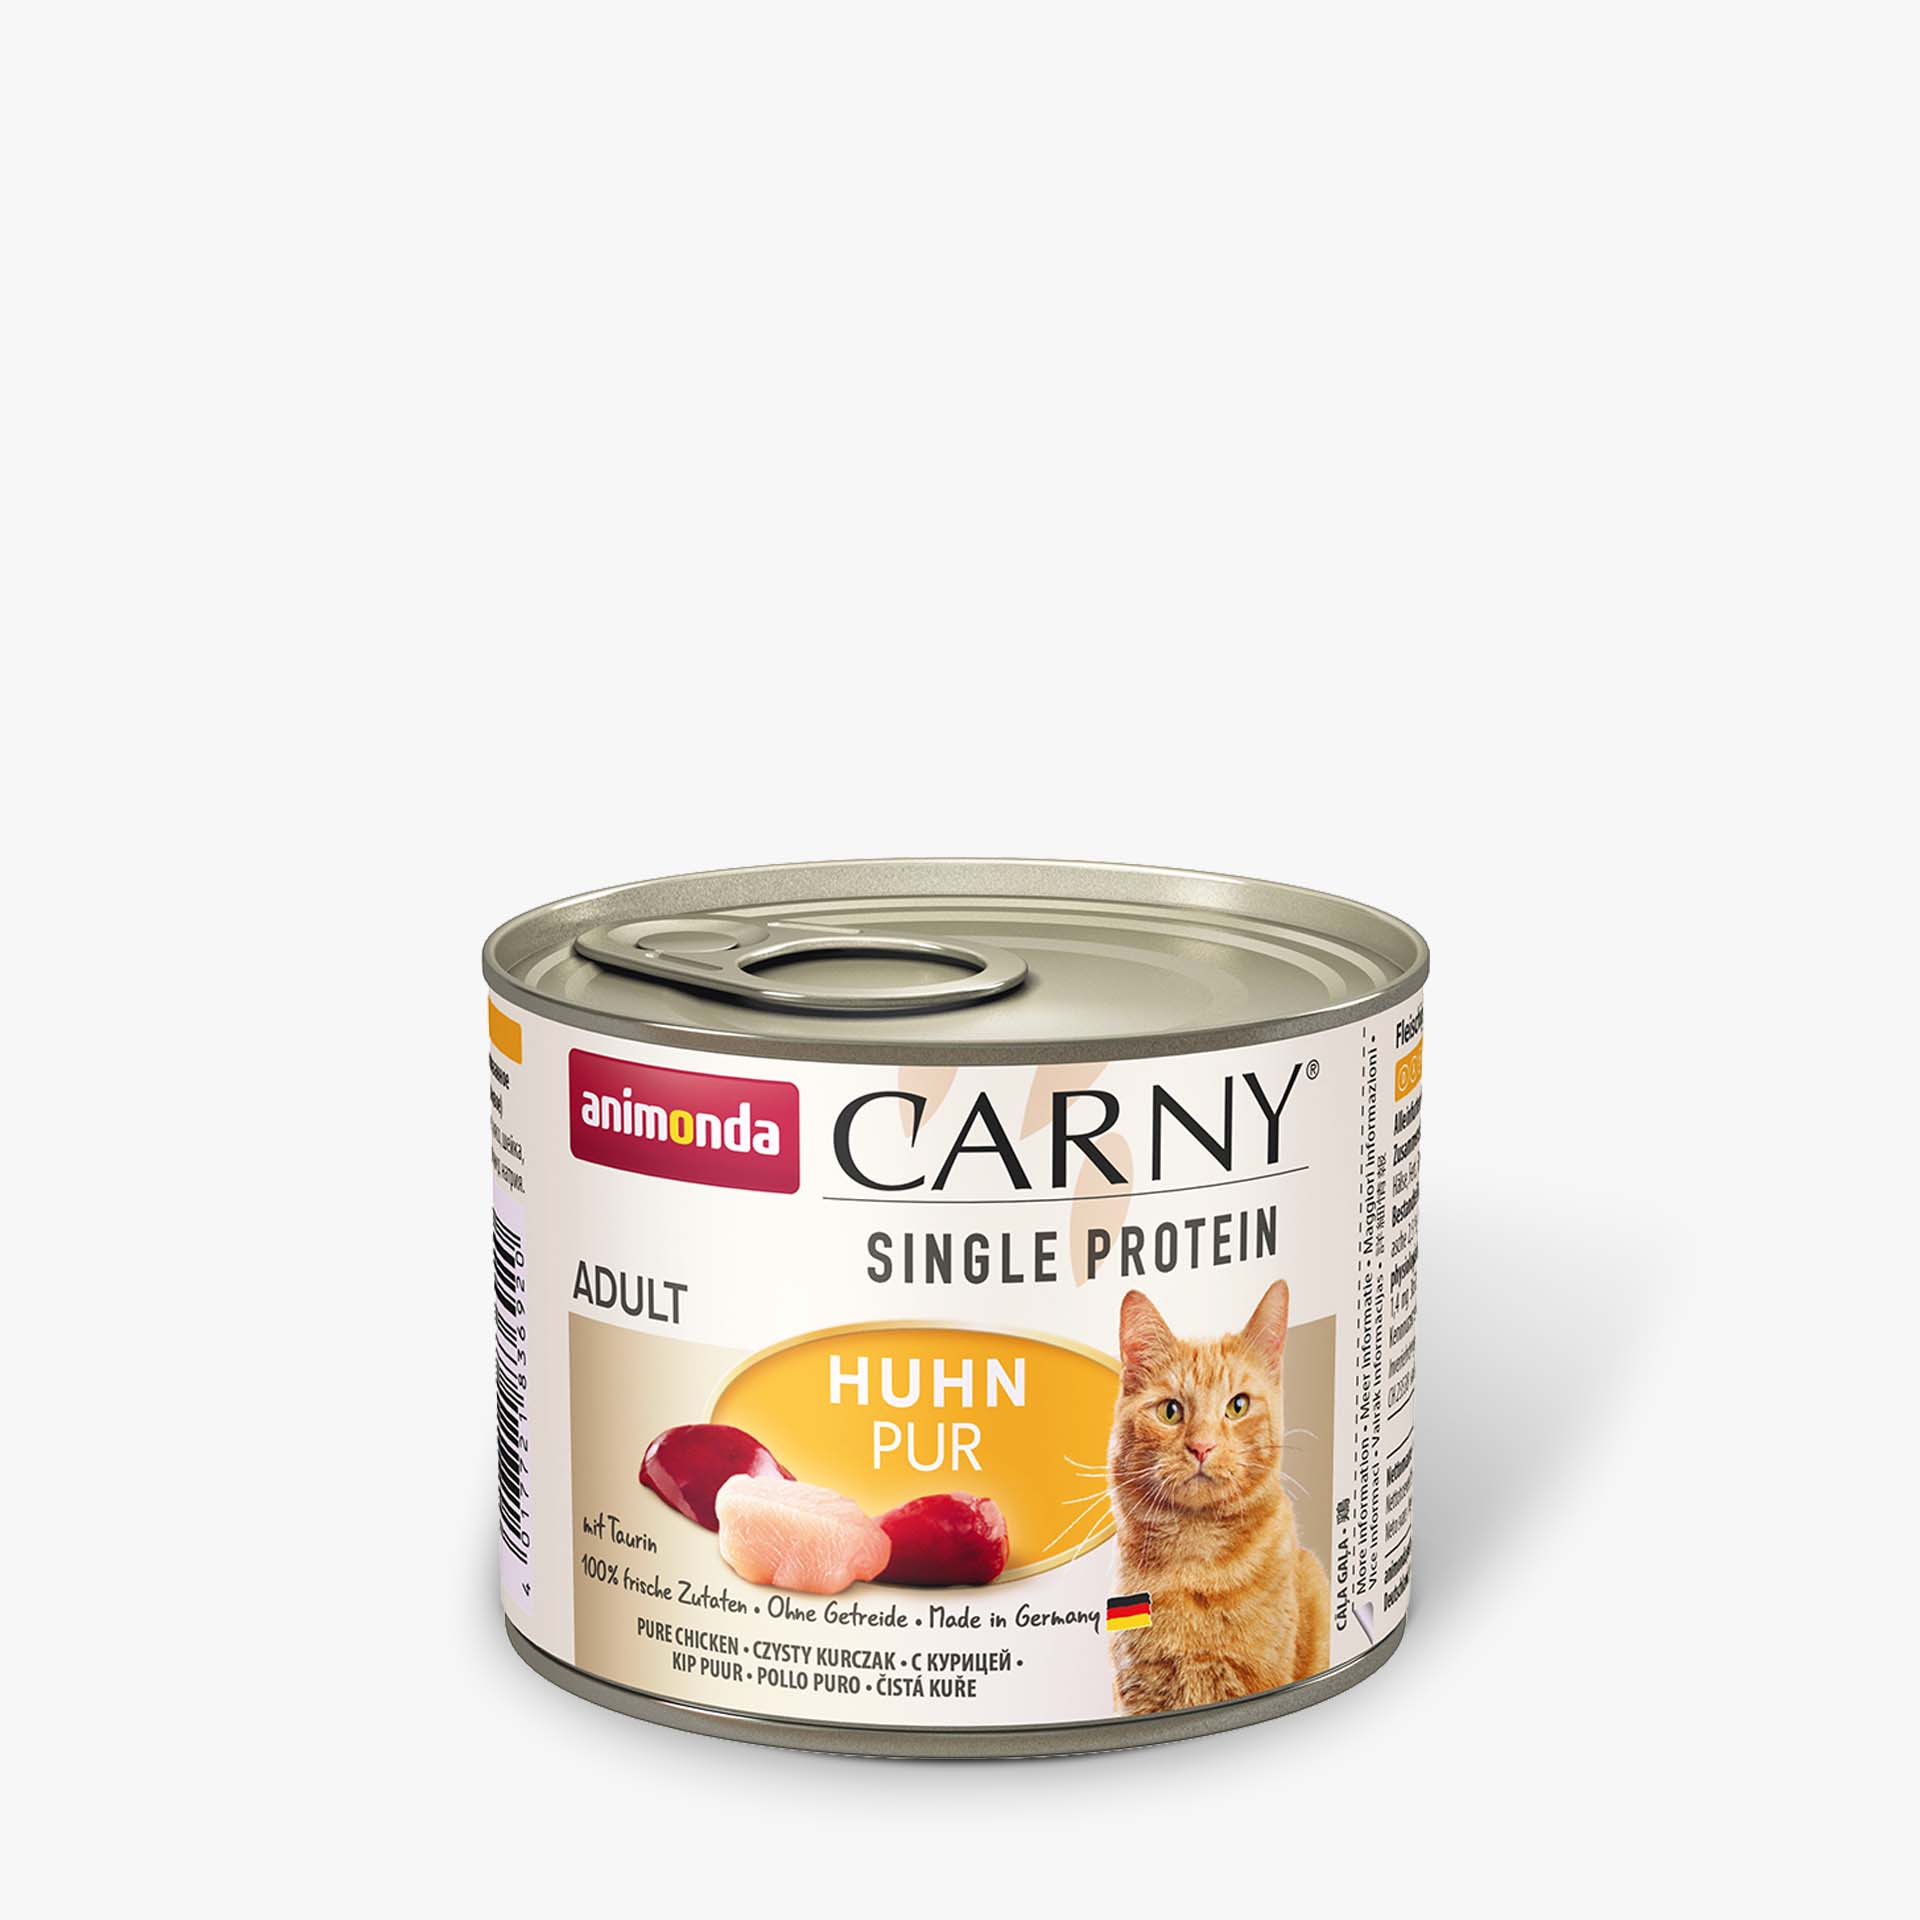 Carny pure chicken Single Protein